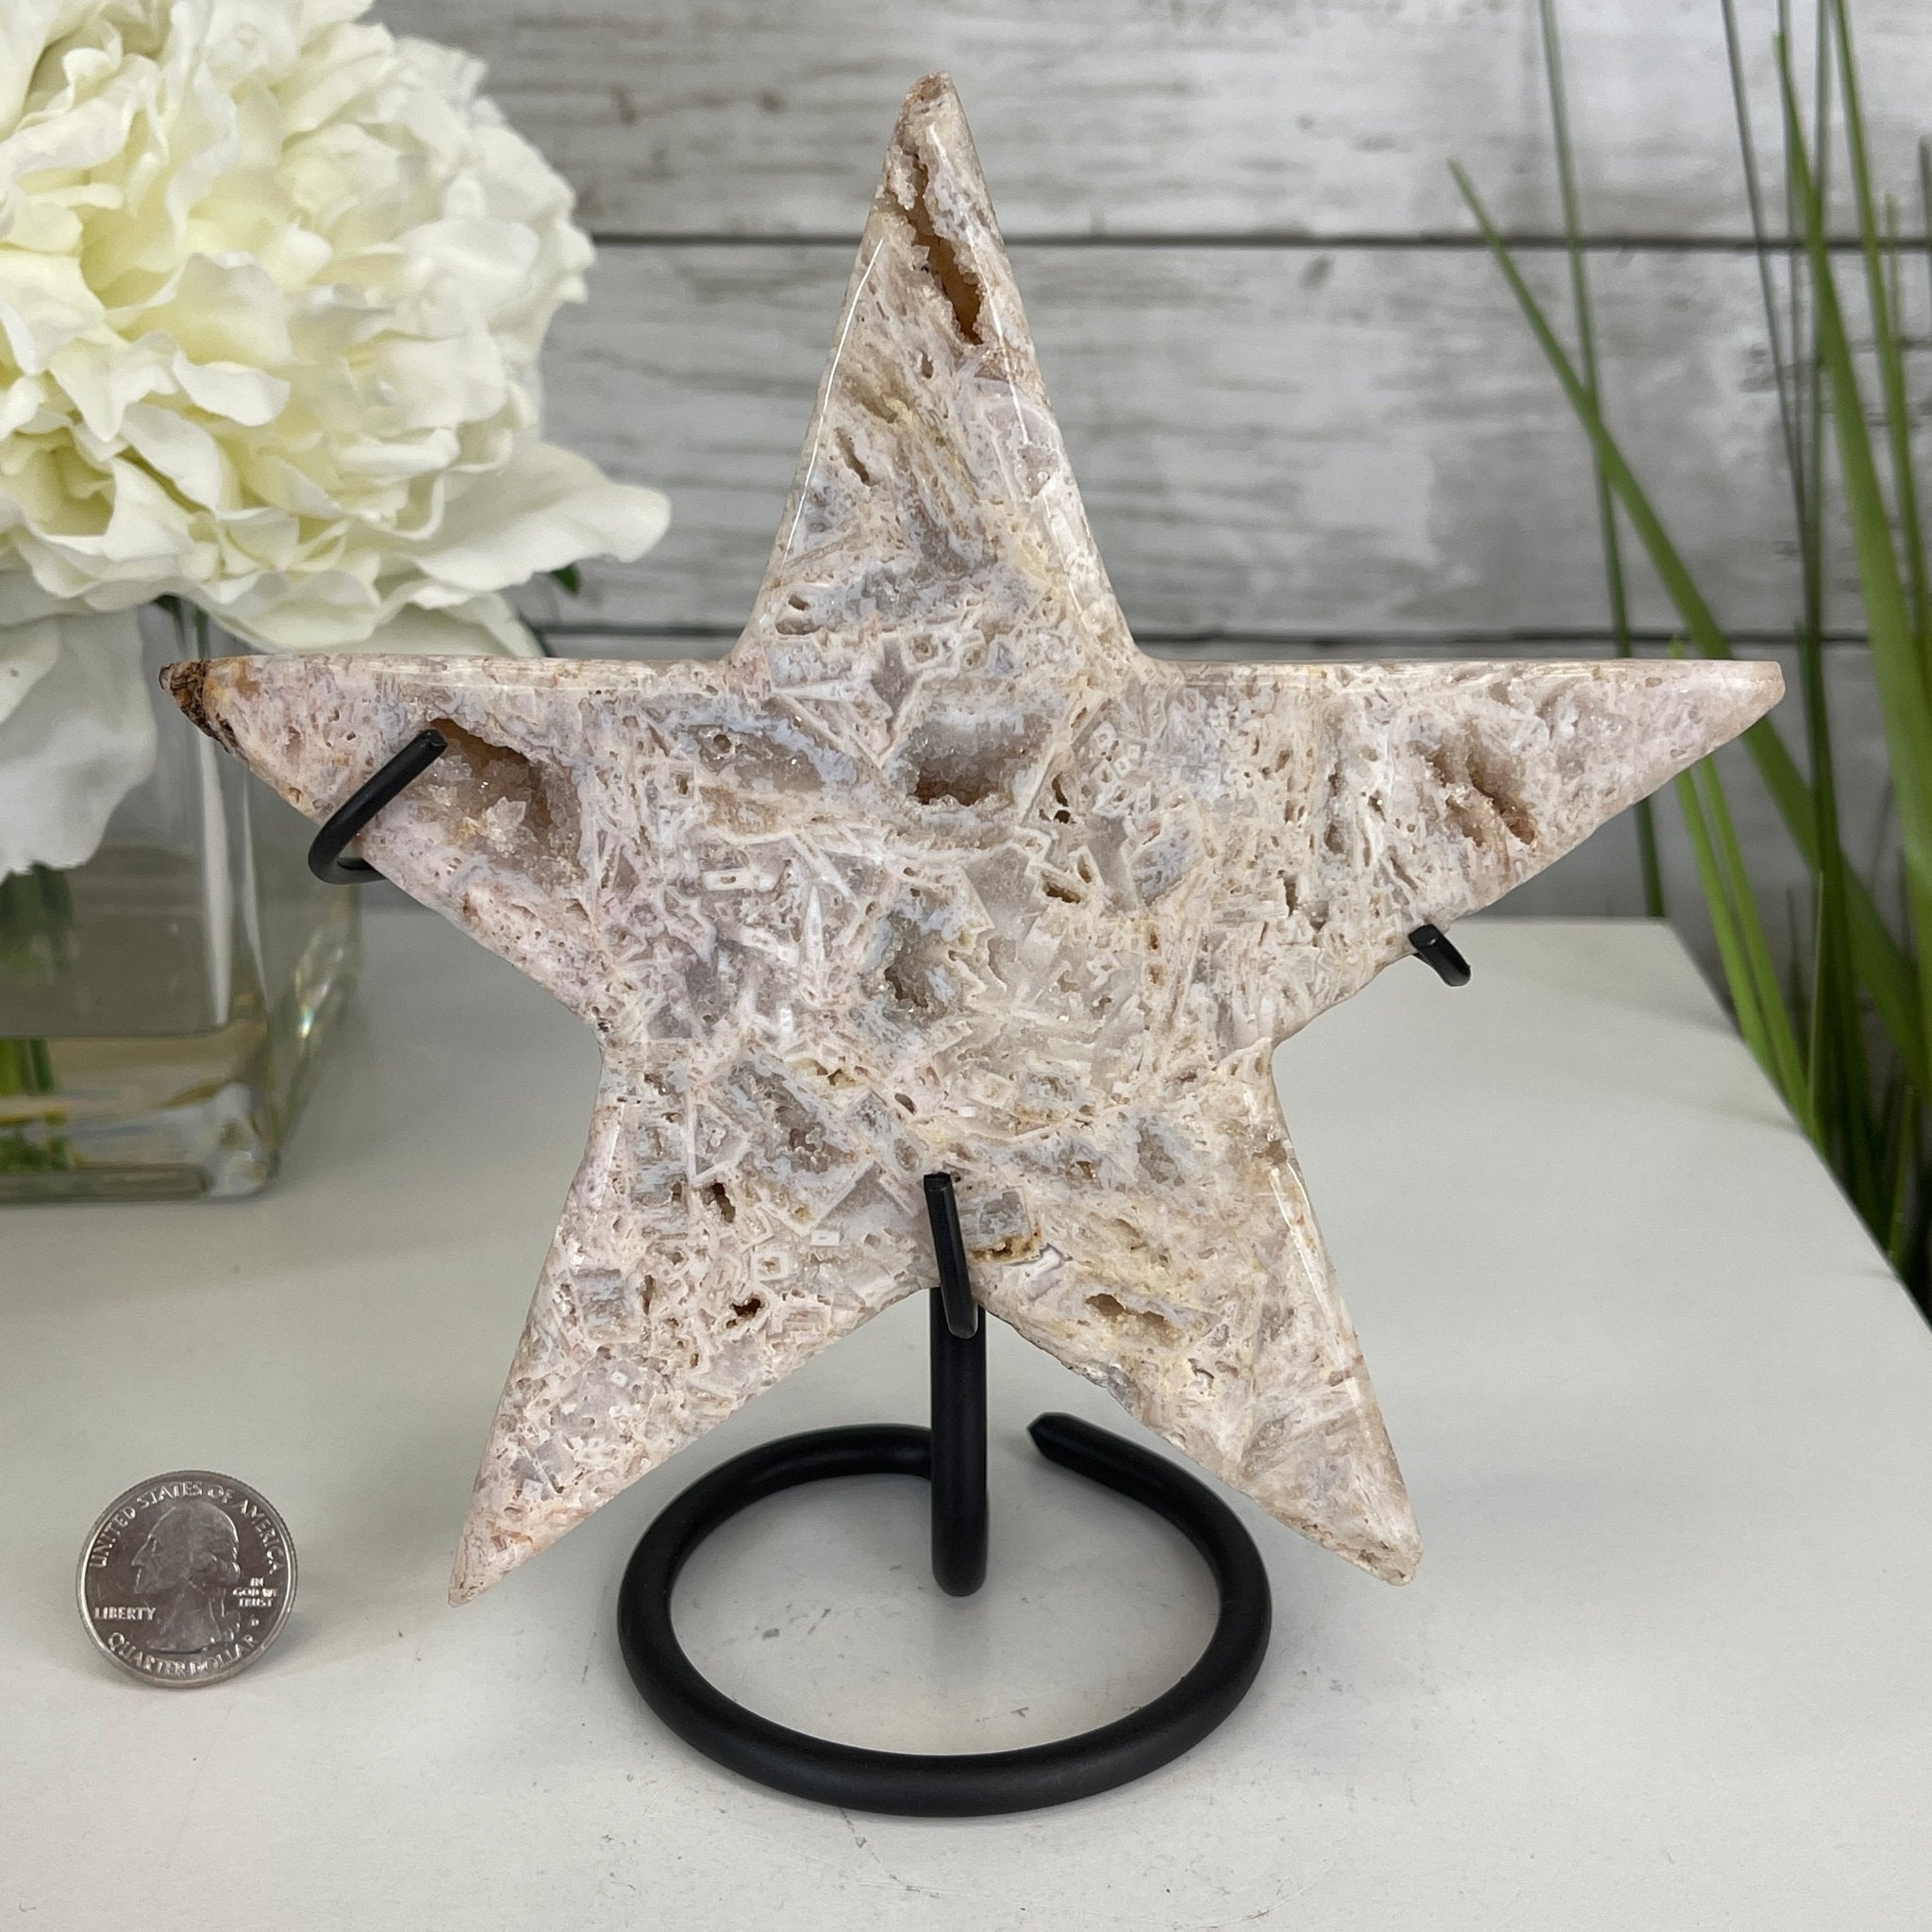 Pink Amethyst Star on a Metal Stand 7" Tall #5746-0007 by Brazil Gems - Brazil GemsBrazil GemsPink Amethyst Star on a Metal Stand 7" Tall #5746-0007 by Brazil GemsStars5746-0007